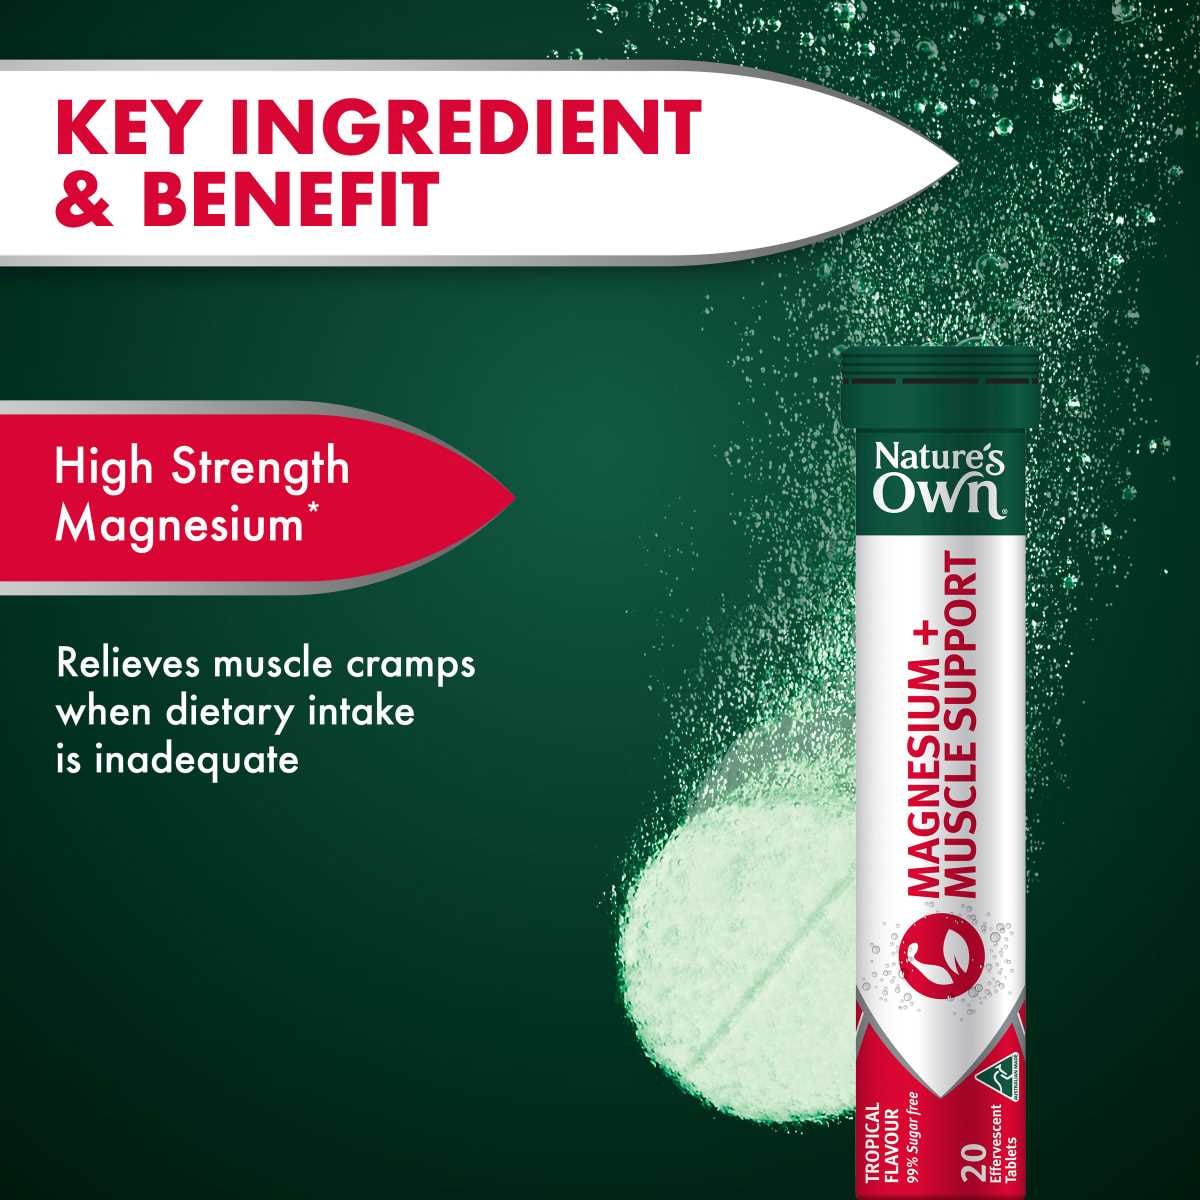 Nature's Own Effervescent Magnesium + Muscle Support Tablets 20 Pack